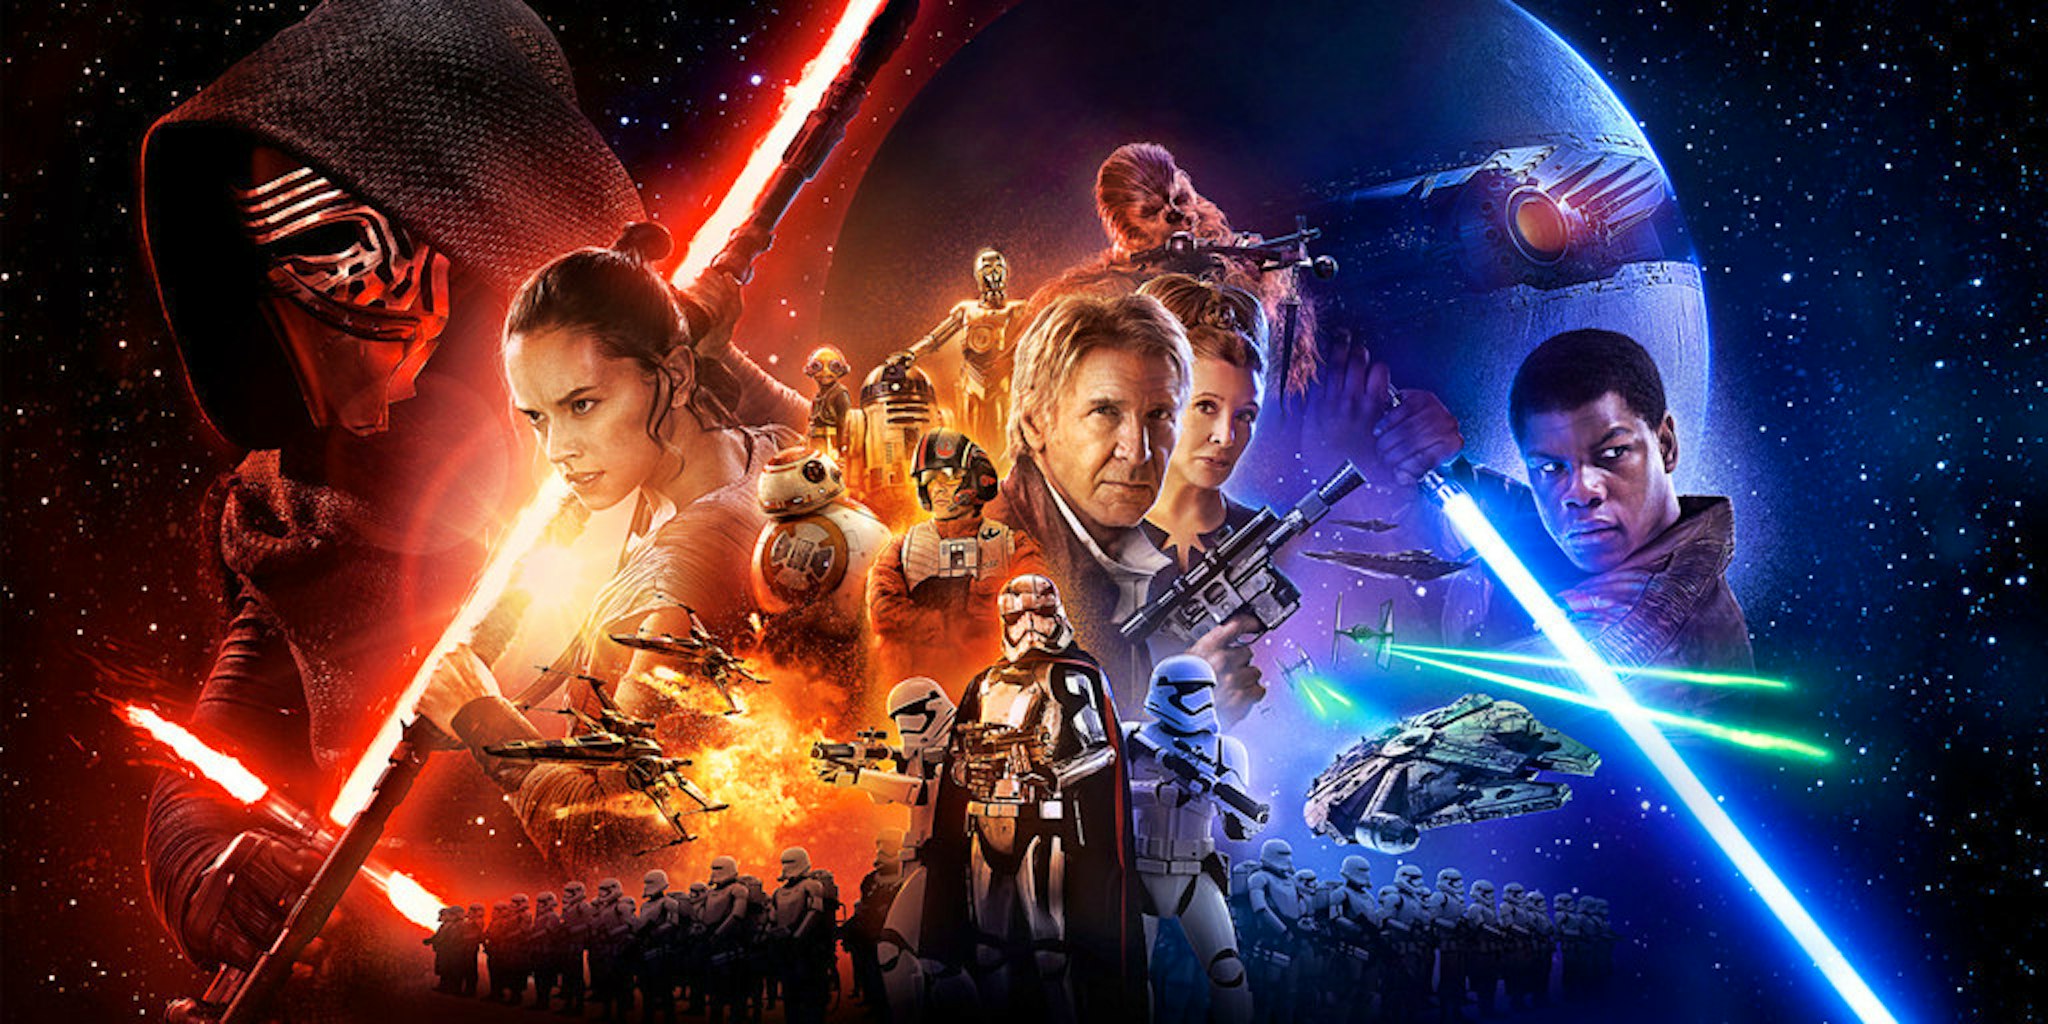 Force Awakens China Poster / Chinese 'Star Wars: The Force Awakens' Poster Accused of ... / Póster chino de the force awakens acusado de racismo.